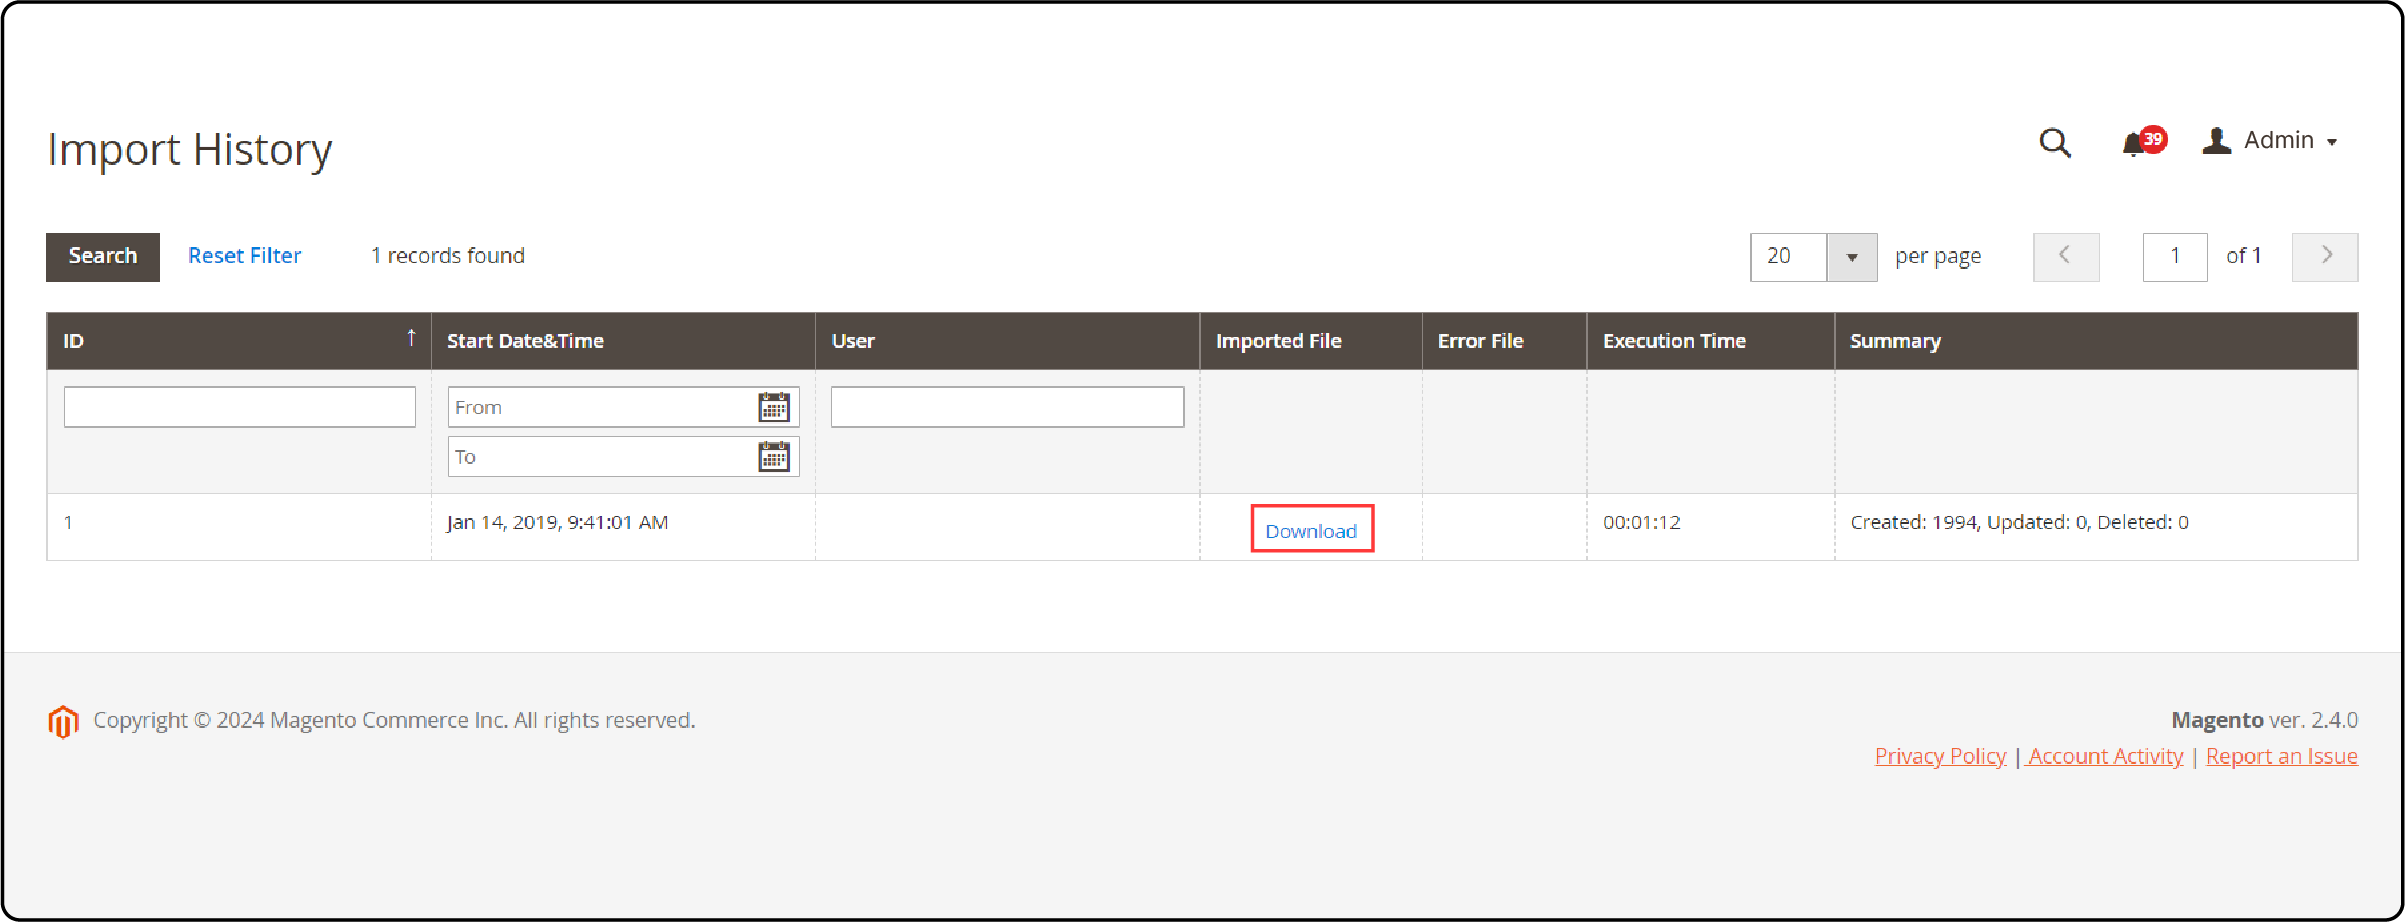 Steps to View the Import History for Magento 2-Click on &quot;Download&quot; under the &quot;Imported File&quot; column to download the imported file